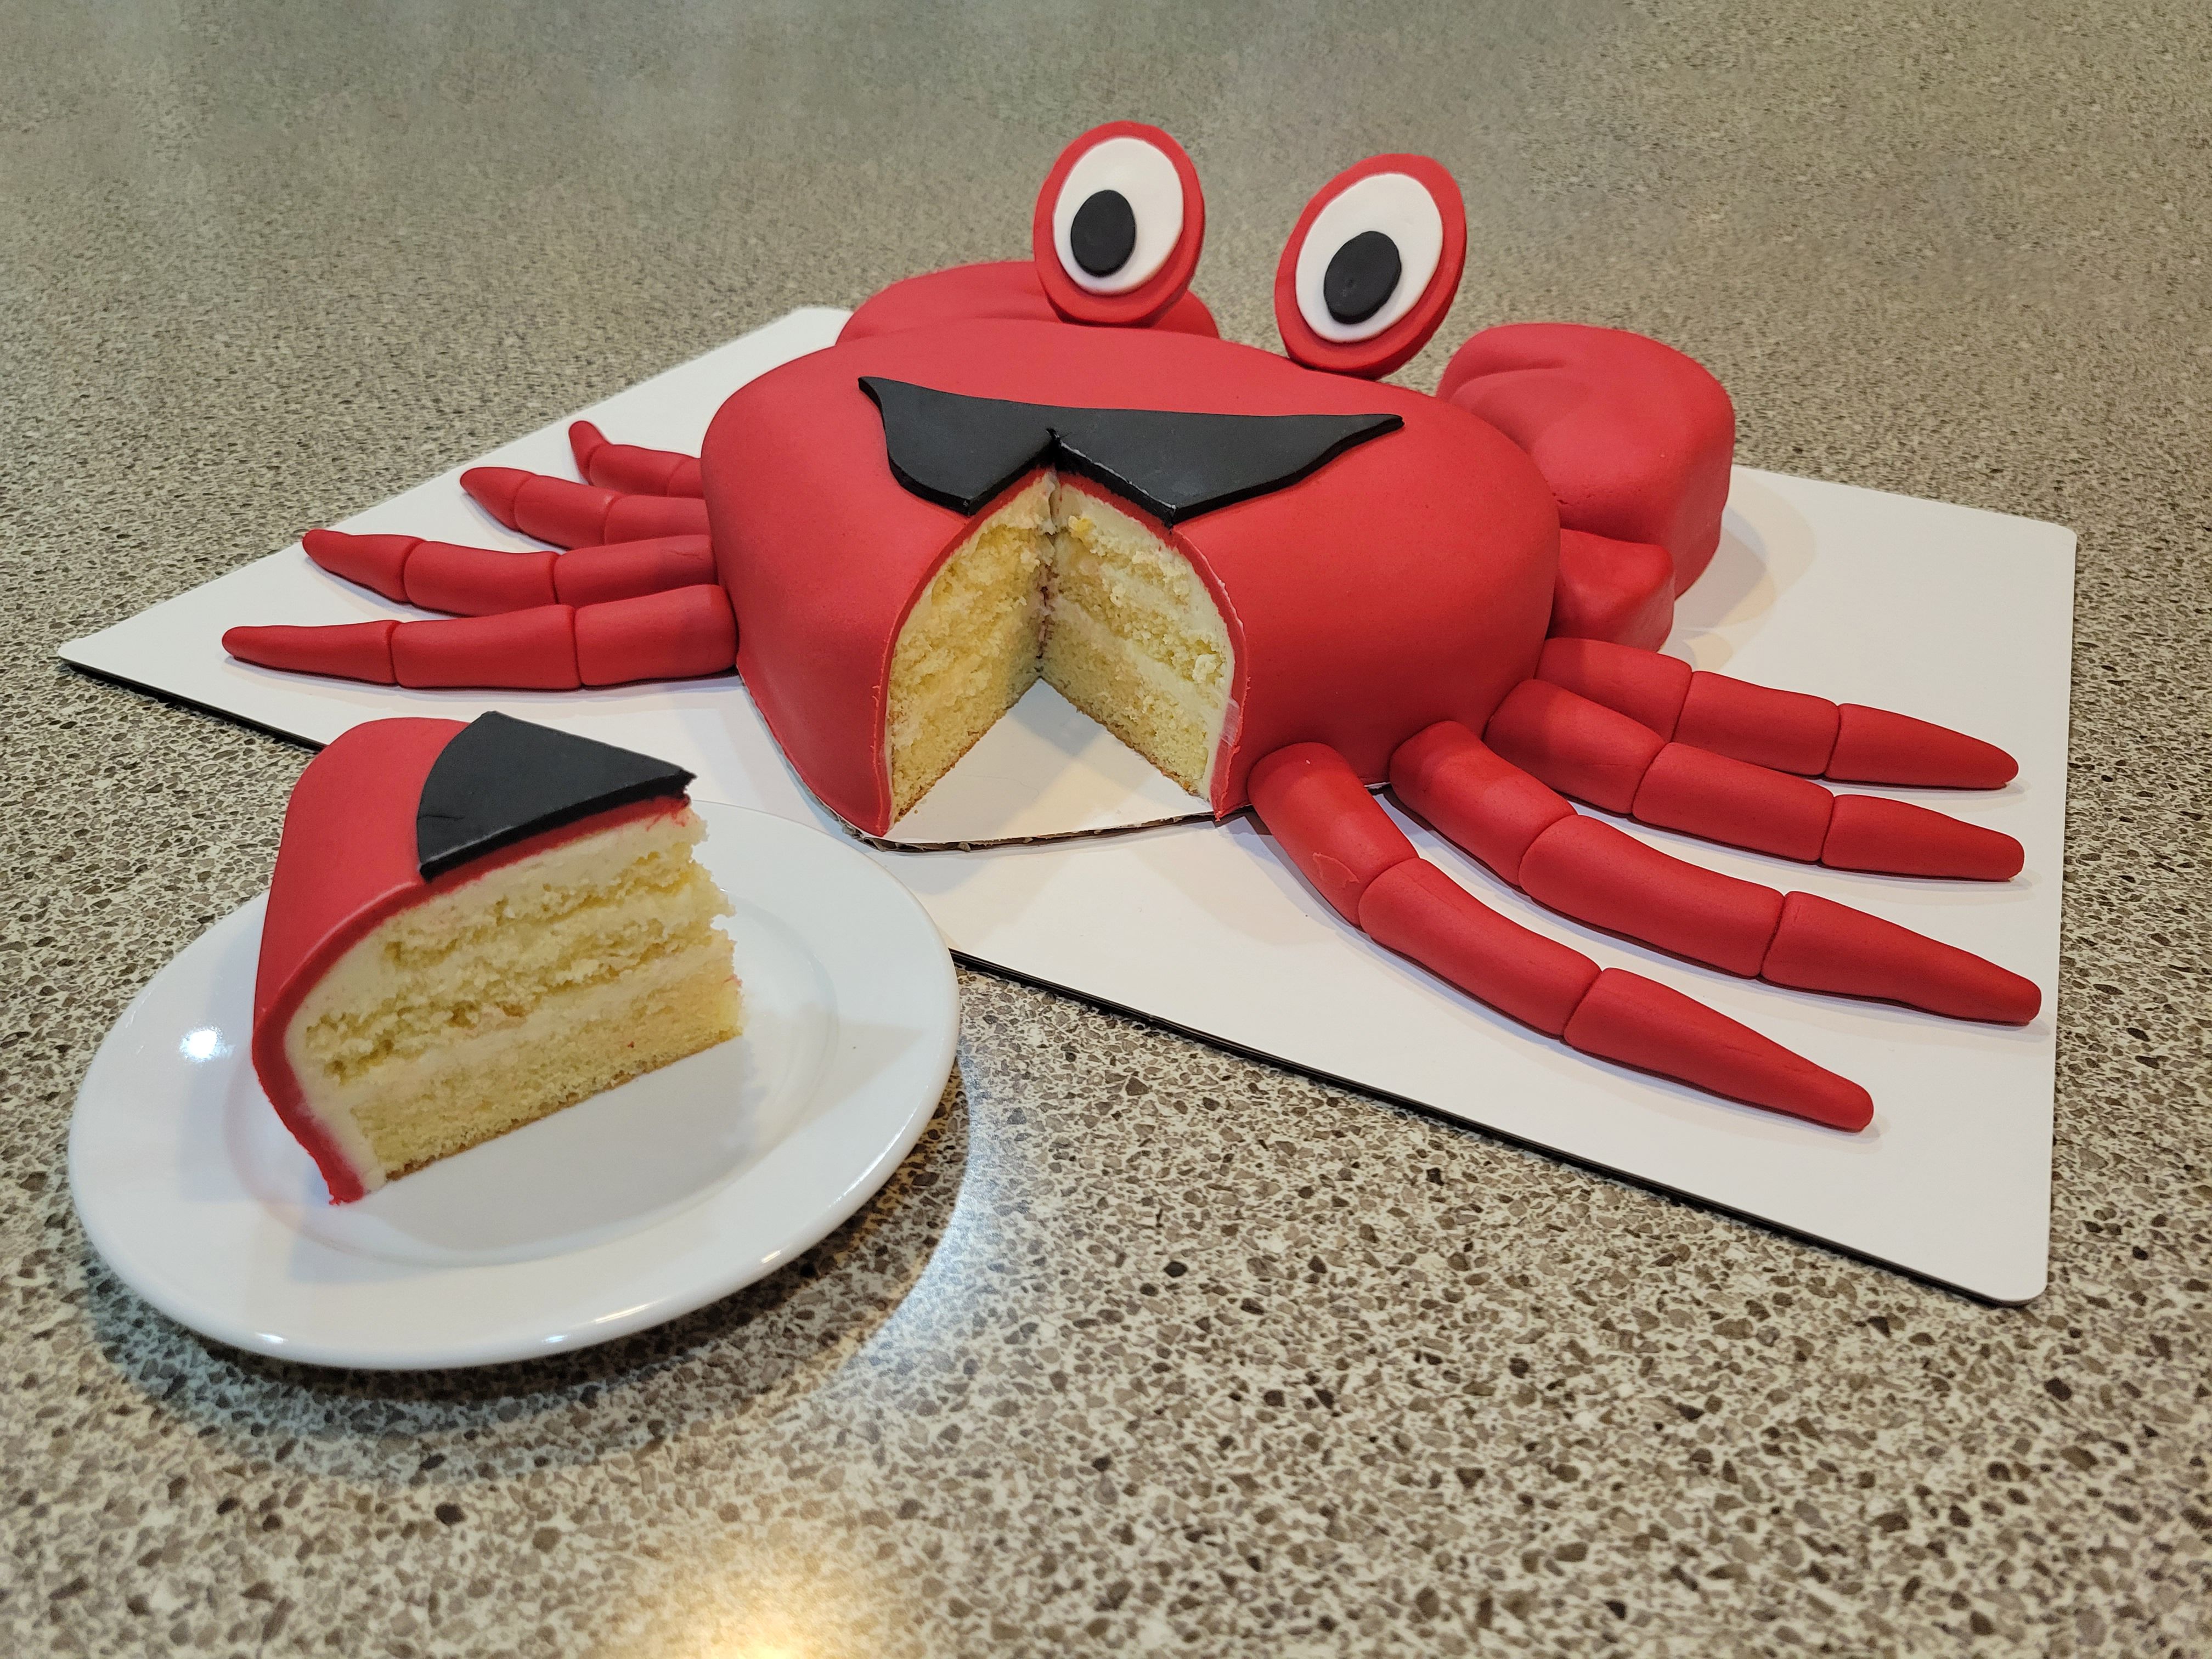 The best Under the Sea birthday cakes - Chickabug